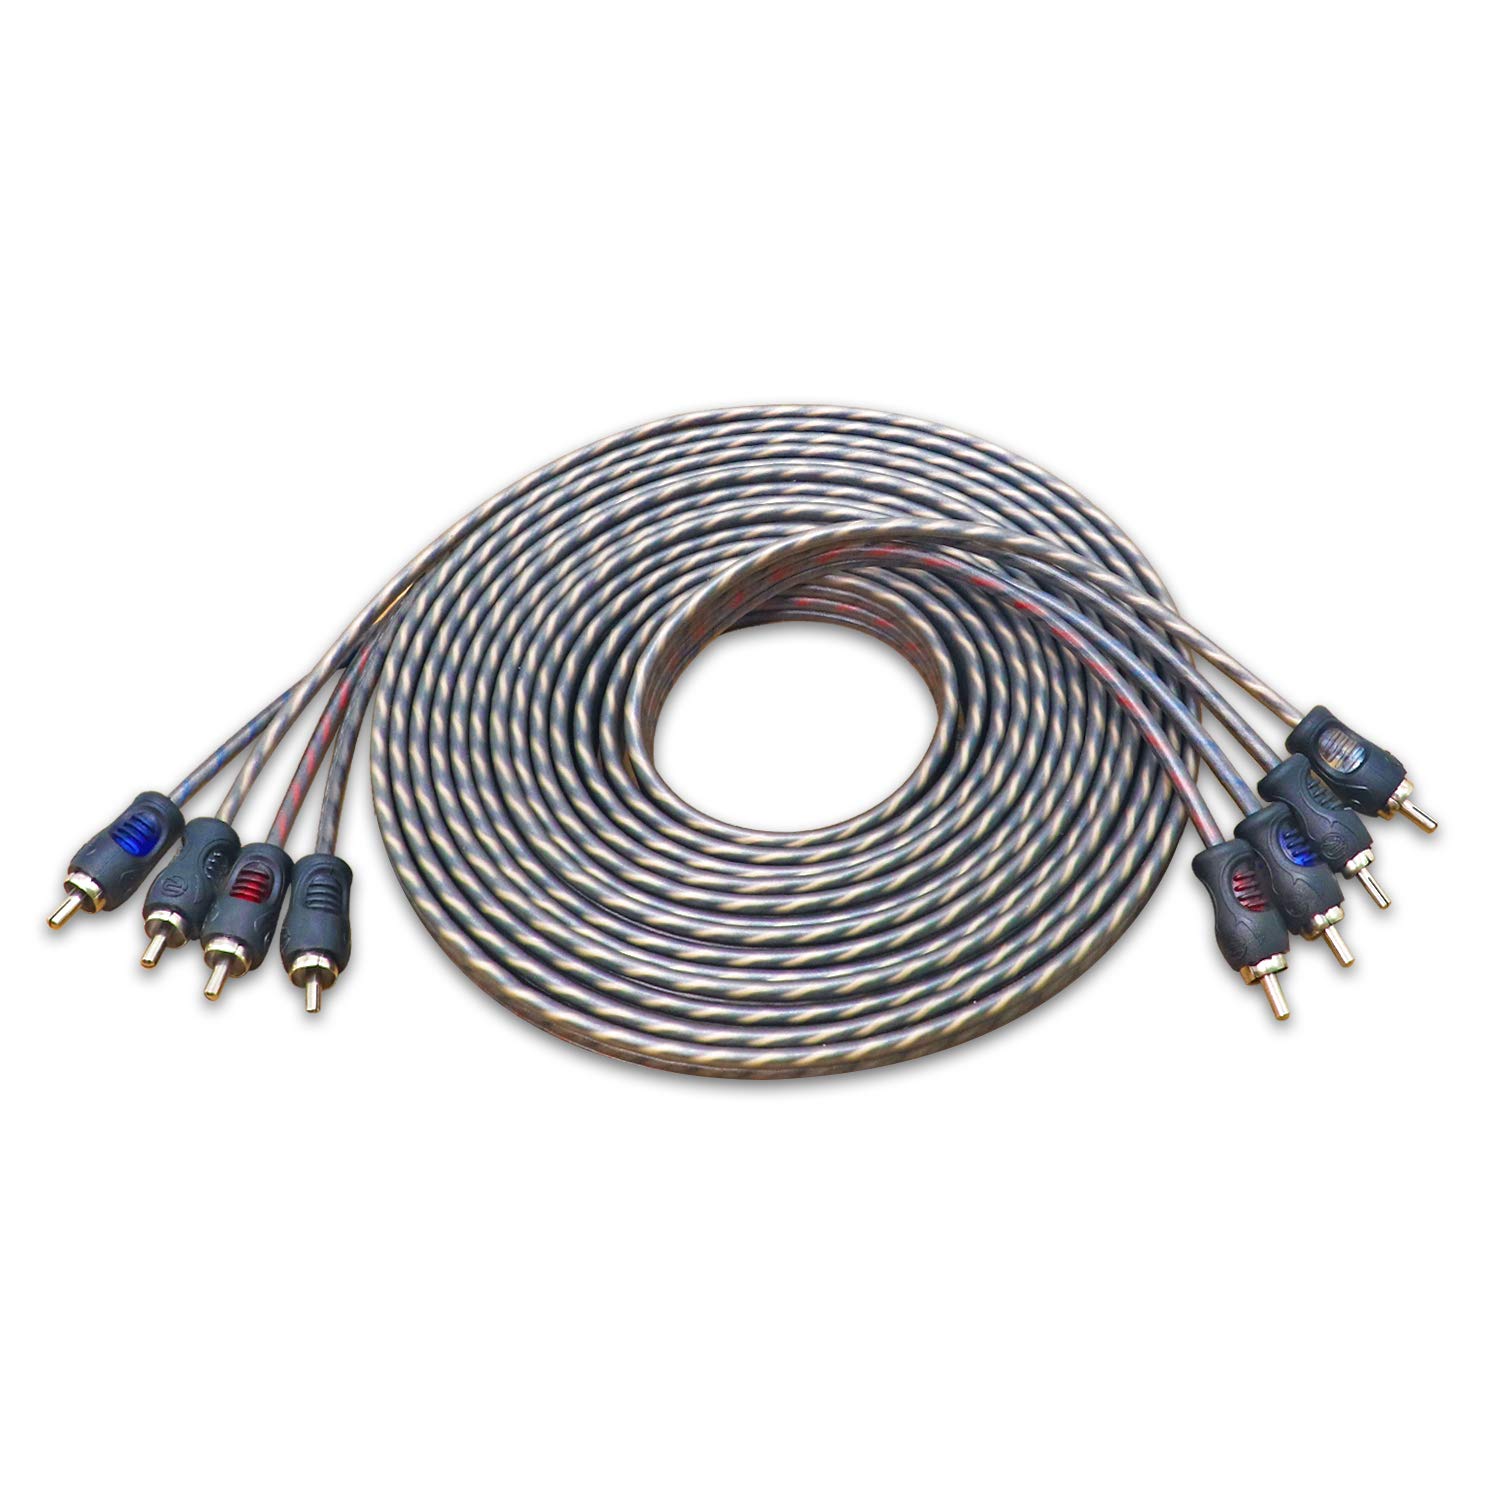 RECOIL RCI417 100% Oxygen Free Copper 17ft 4 Channel [...]